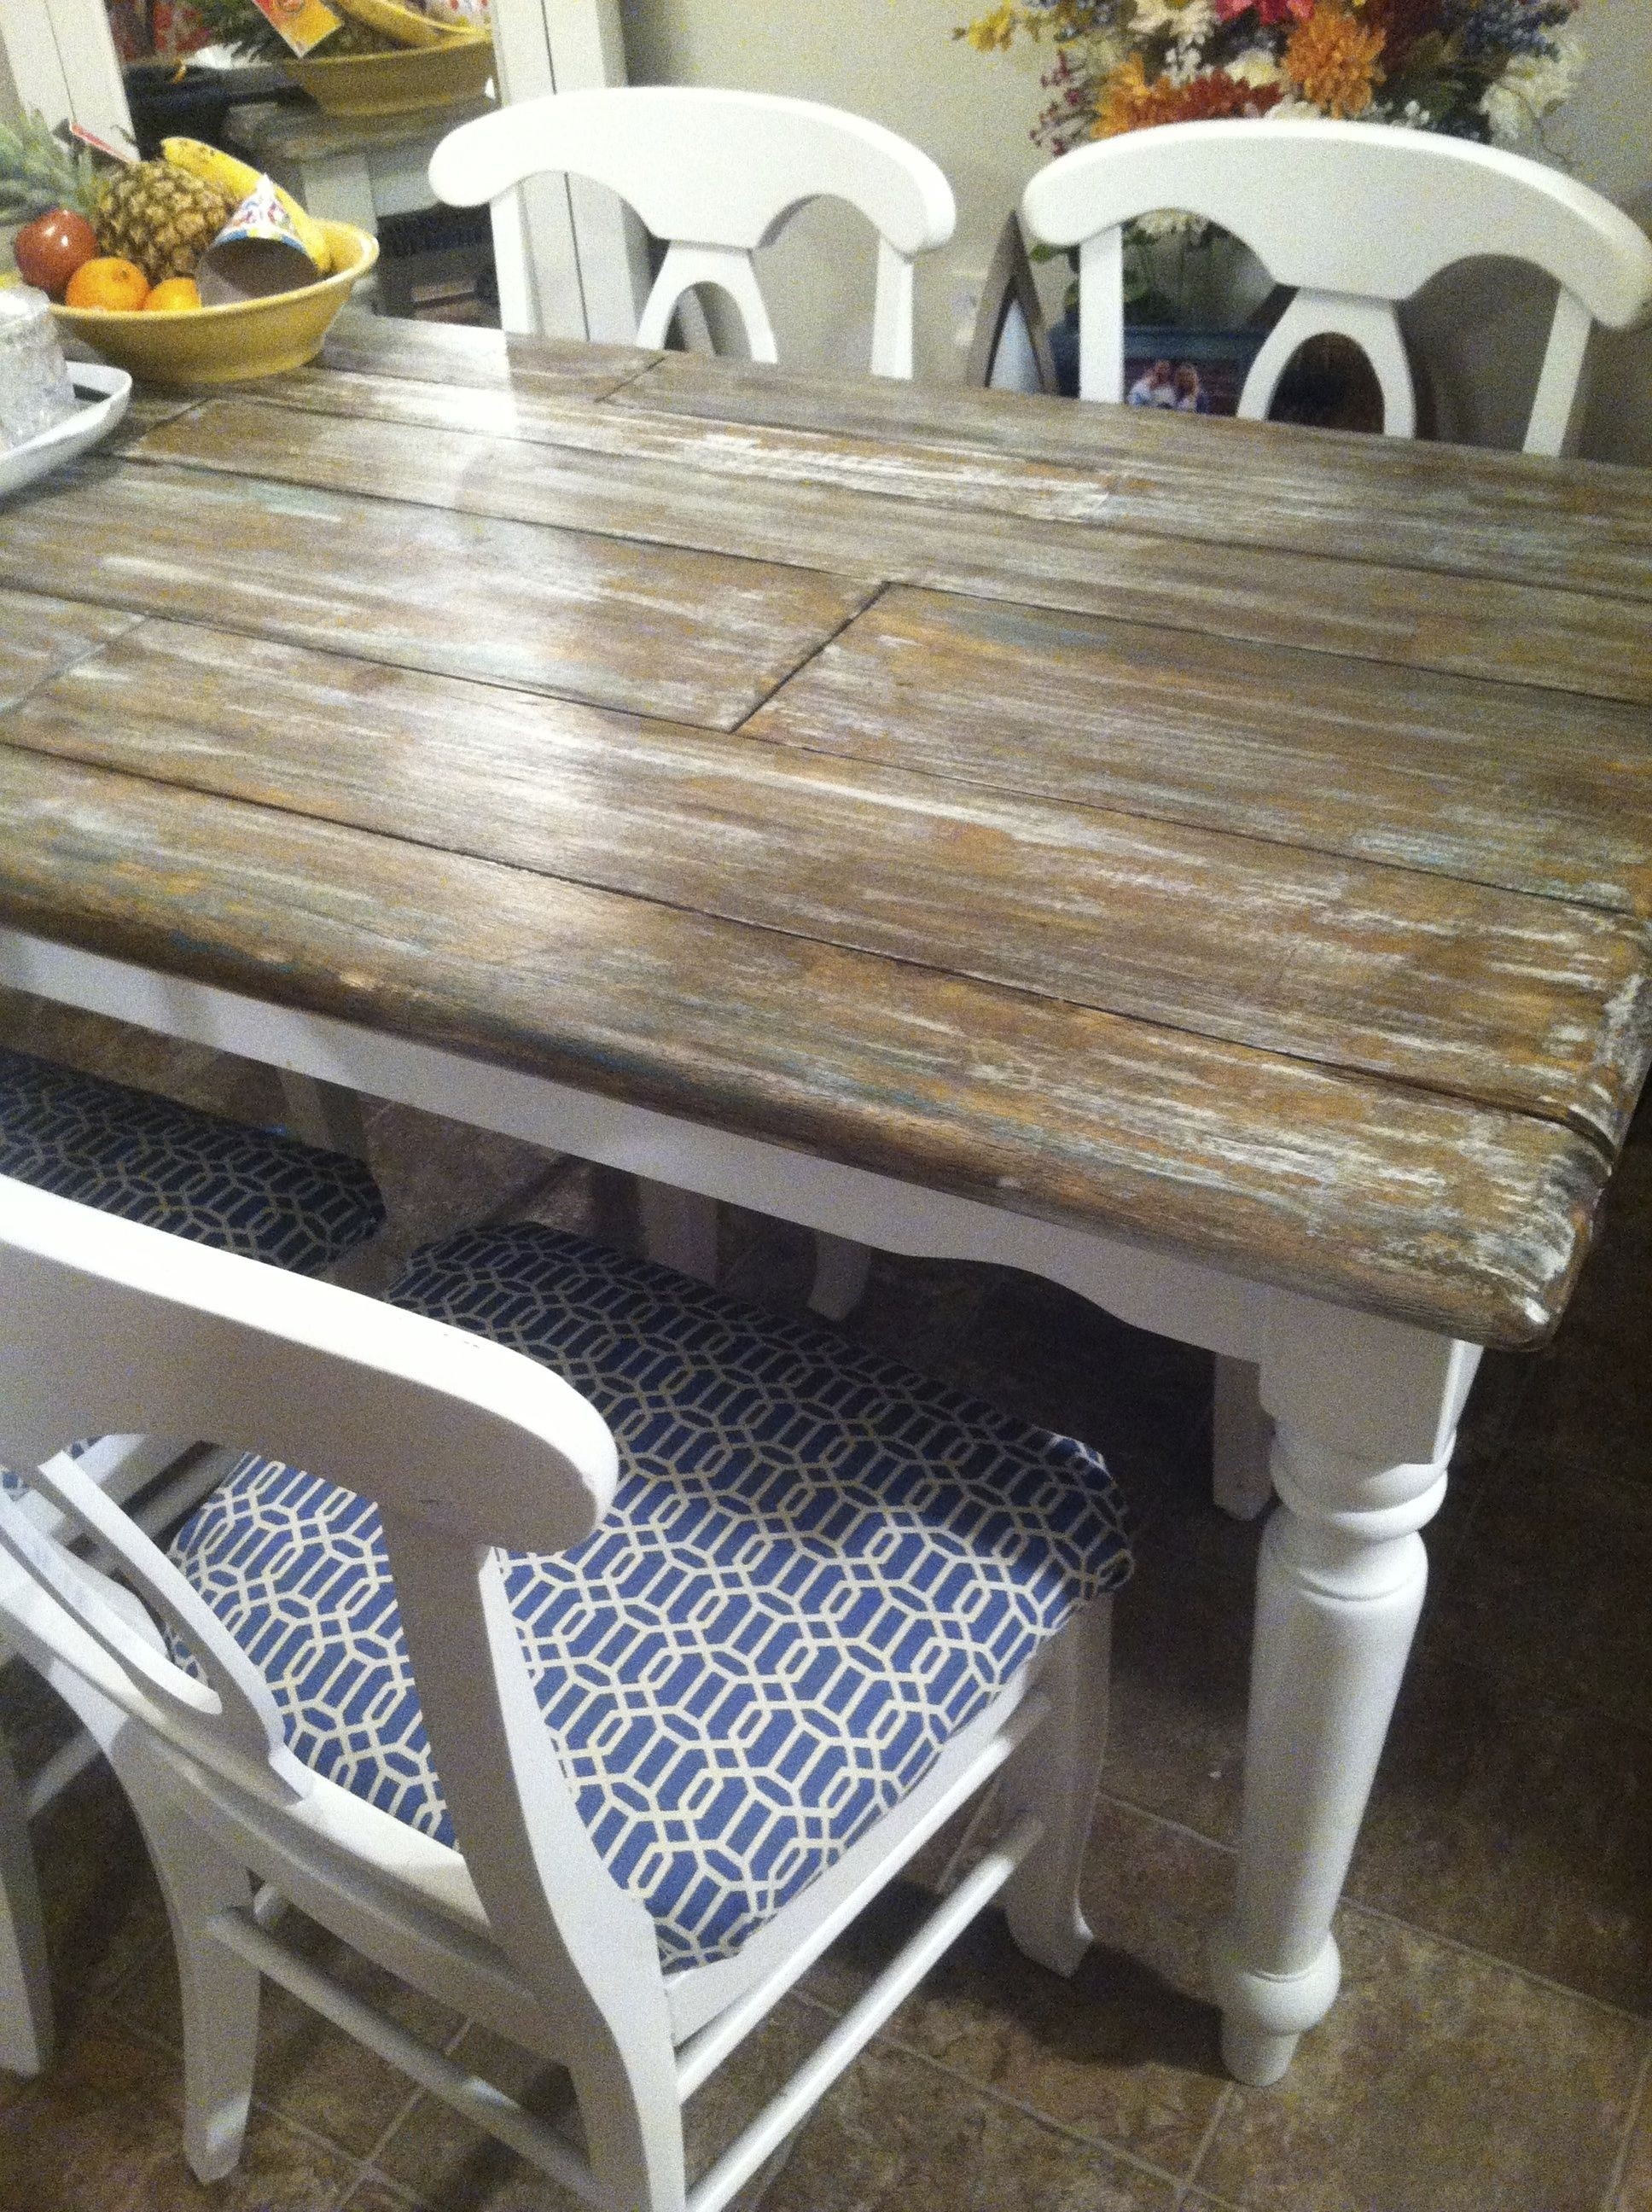 Distressed wood kitchen tables